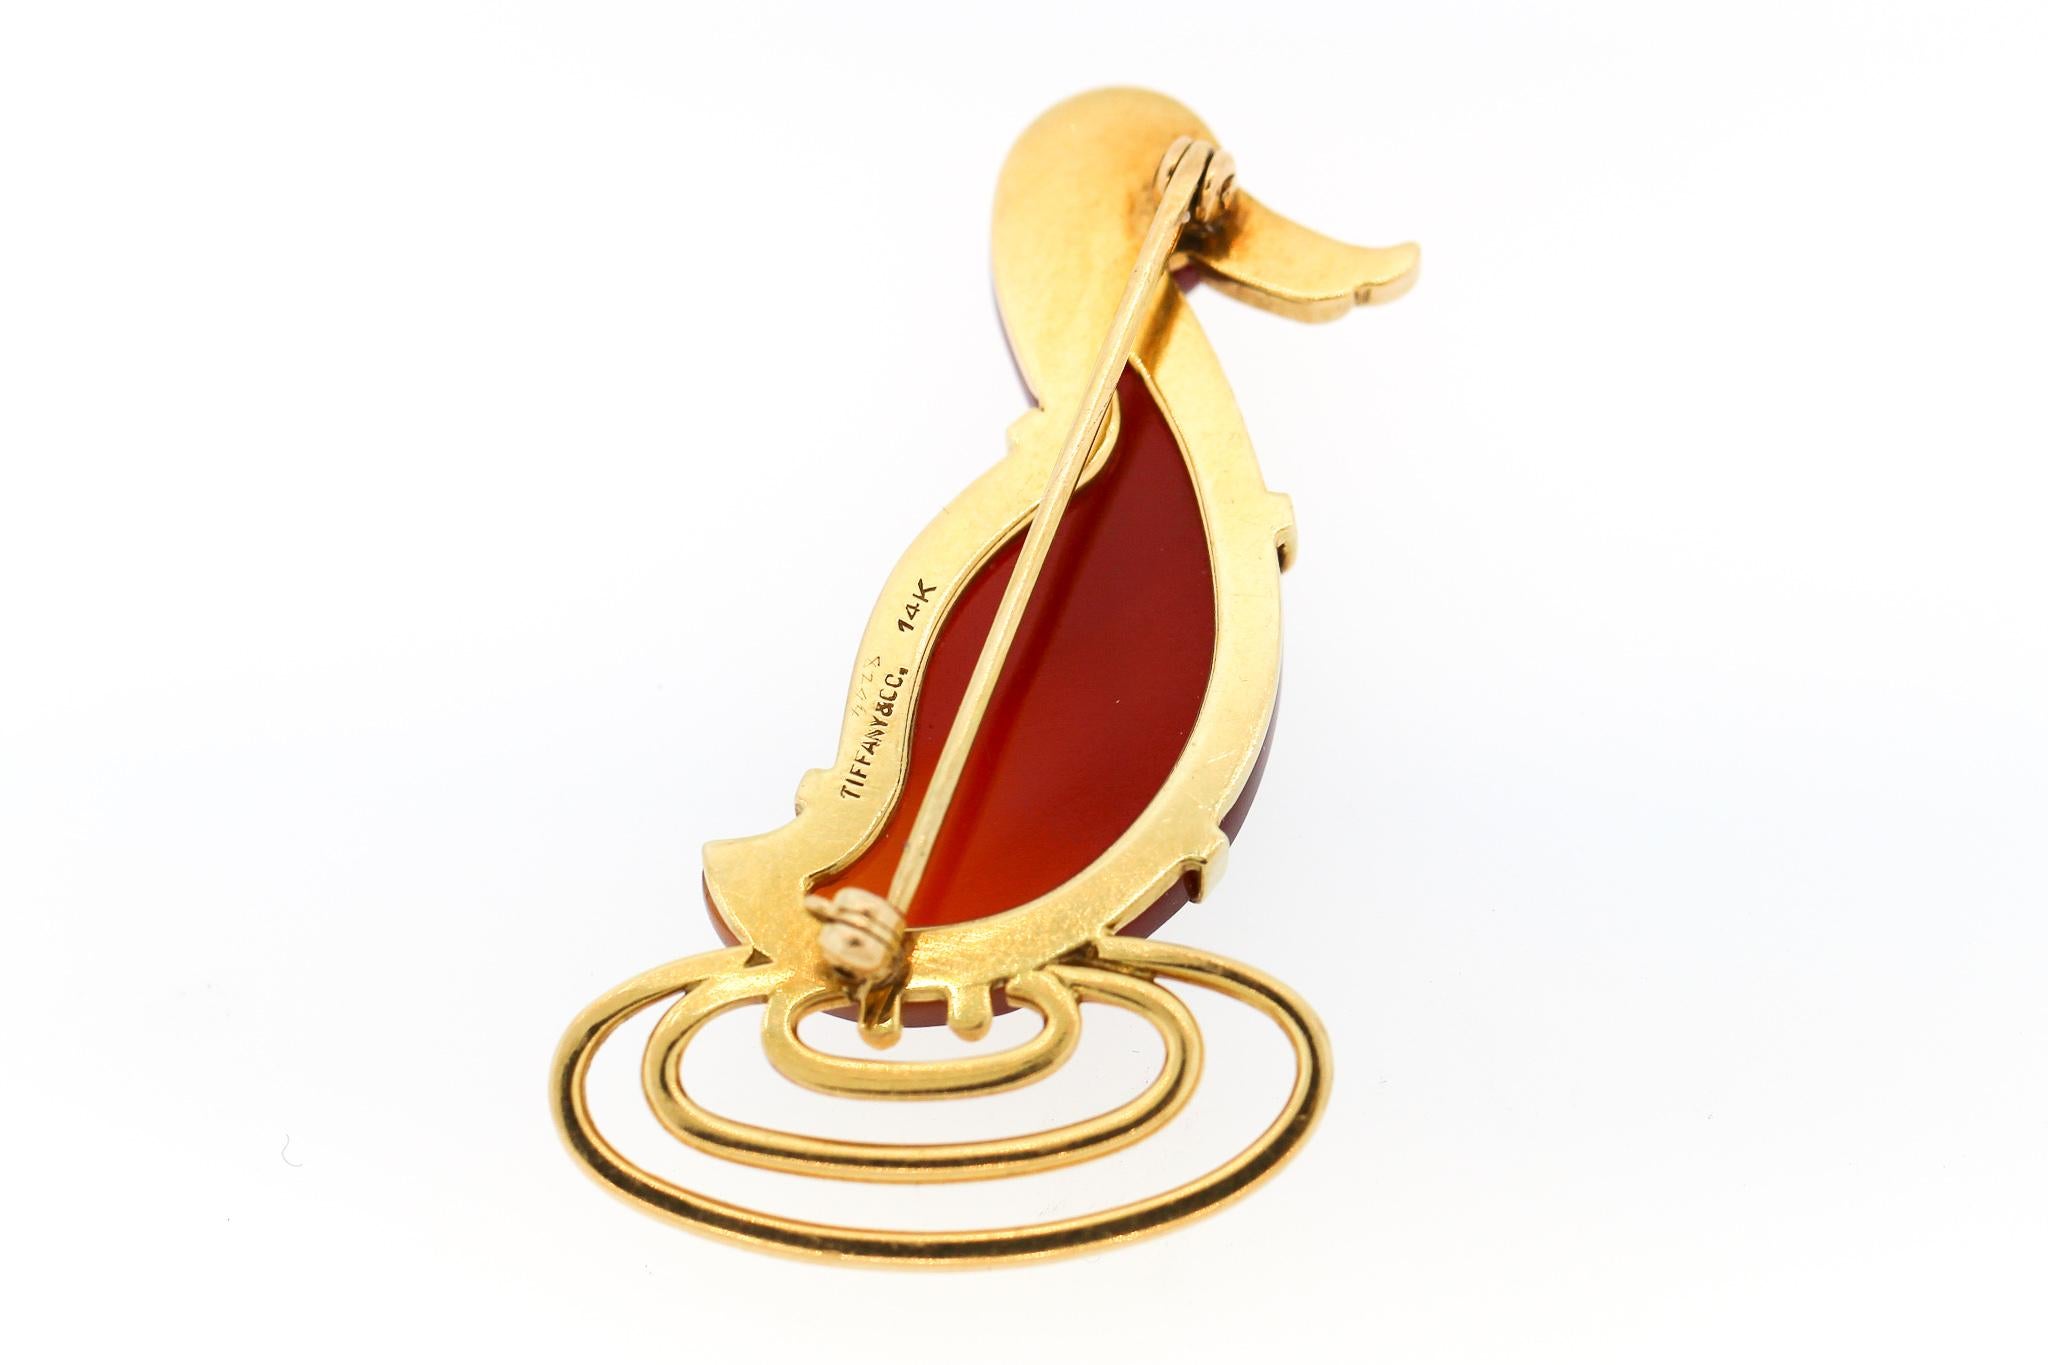 A vintage 14k yellow gold carnelian duck pin by Tiffany & Co., circa 1940. This whimsical duck is shown standing in water, and the body of the duck is carved amber colored carnelian. The pin is delightful and well executed. It is 1.75 inches tall.